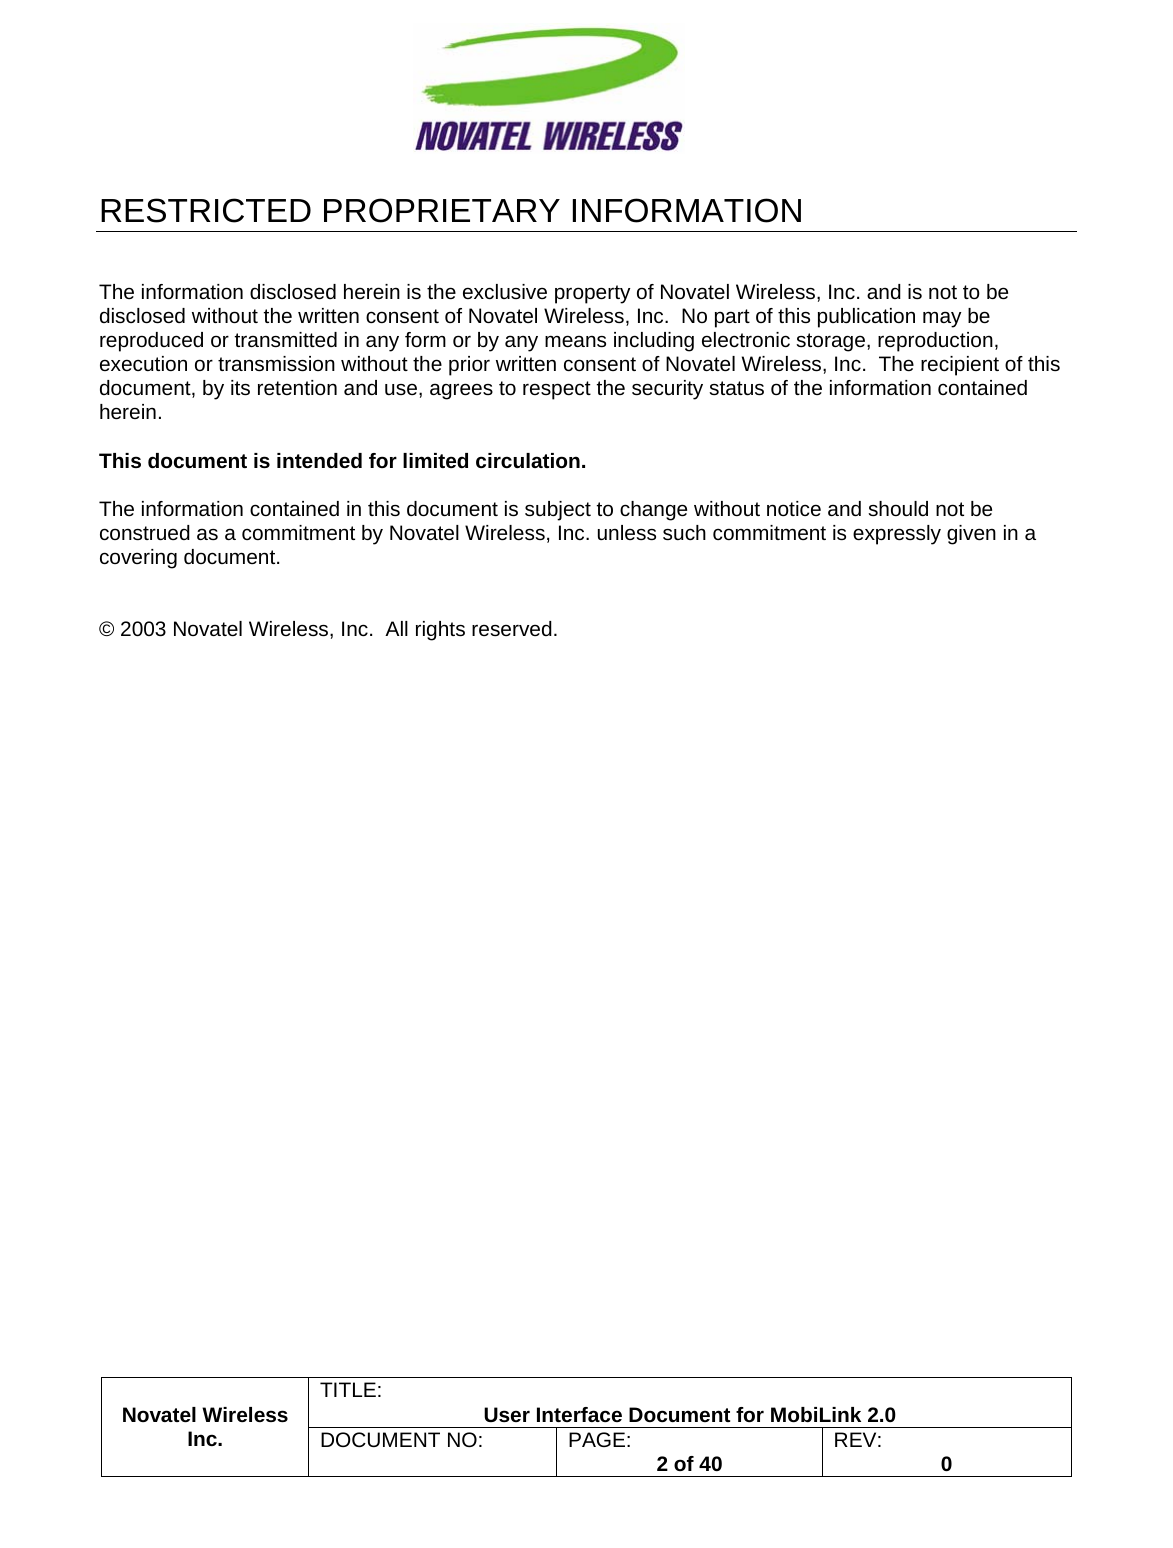                                                         TITLE:  User Interface Document for MobiLink 2.0 Novatel Wireless  Inc. DOCUMENT NO:  PAGE:   2 of 40  REV:  0   RESTRICTED PROPRIETARY INFORMATION   The information disclosed herein is the exclusive property of Novatel Wireless, Inc. and is not to be disclosed without the written consent of Novatel Wireless, Inc.  No part of this publication may be reproduced or transmitted in any form or by any means including electronic storage, reproduction, execution or transmission without the prior written consent of Novatel Wireless, Inc.  The recipient of this document, by its retention and use, agrees to respect the security status of the information contained herein.  This document is intended for limited circulation.  The information contained in this document is subject to change without notice and should not be construed as a commitment by Novatel Wireless, Inc. unless such commitment is expressly given in a covering document.   © 2003 Novatel Wireless, Inc.  All rights reserved.  